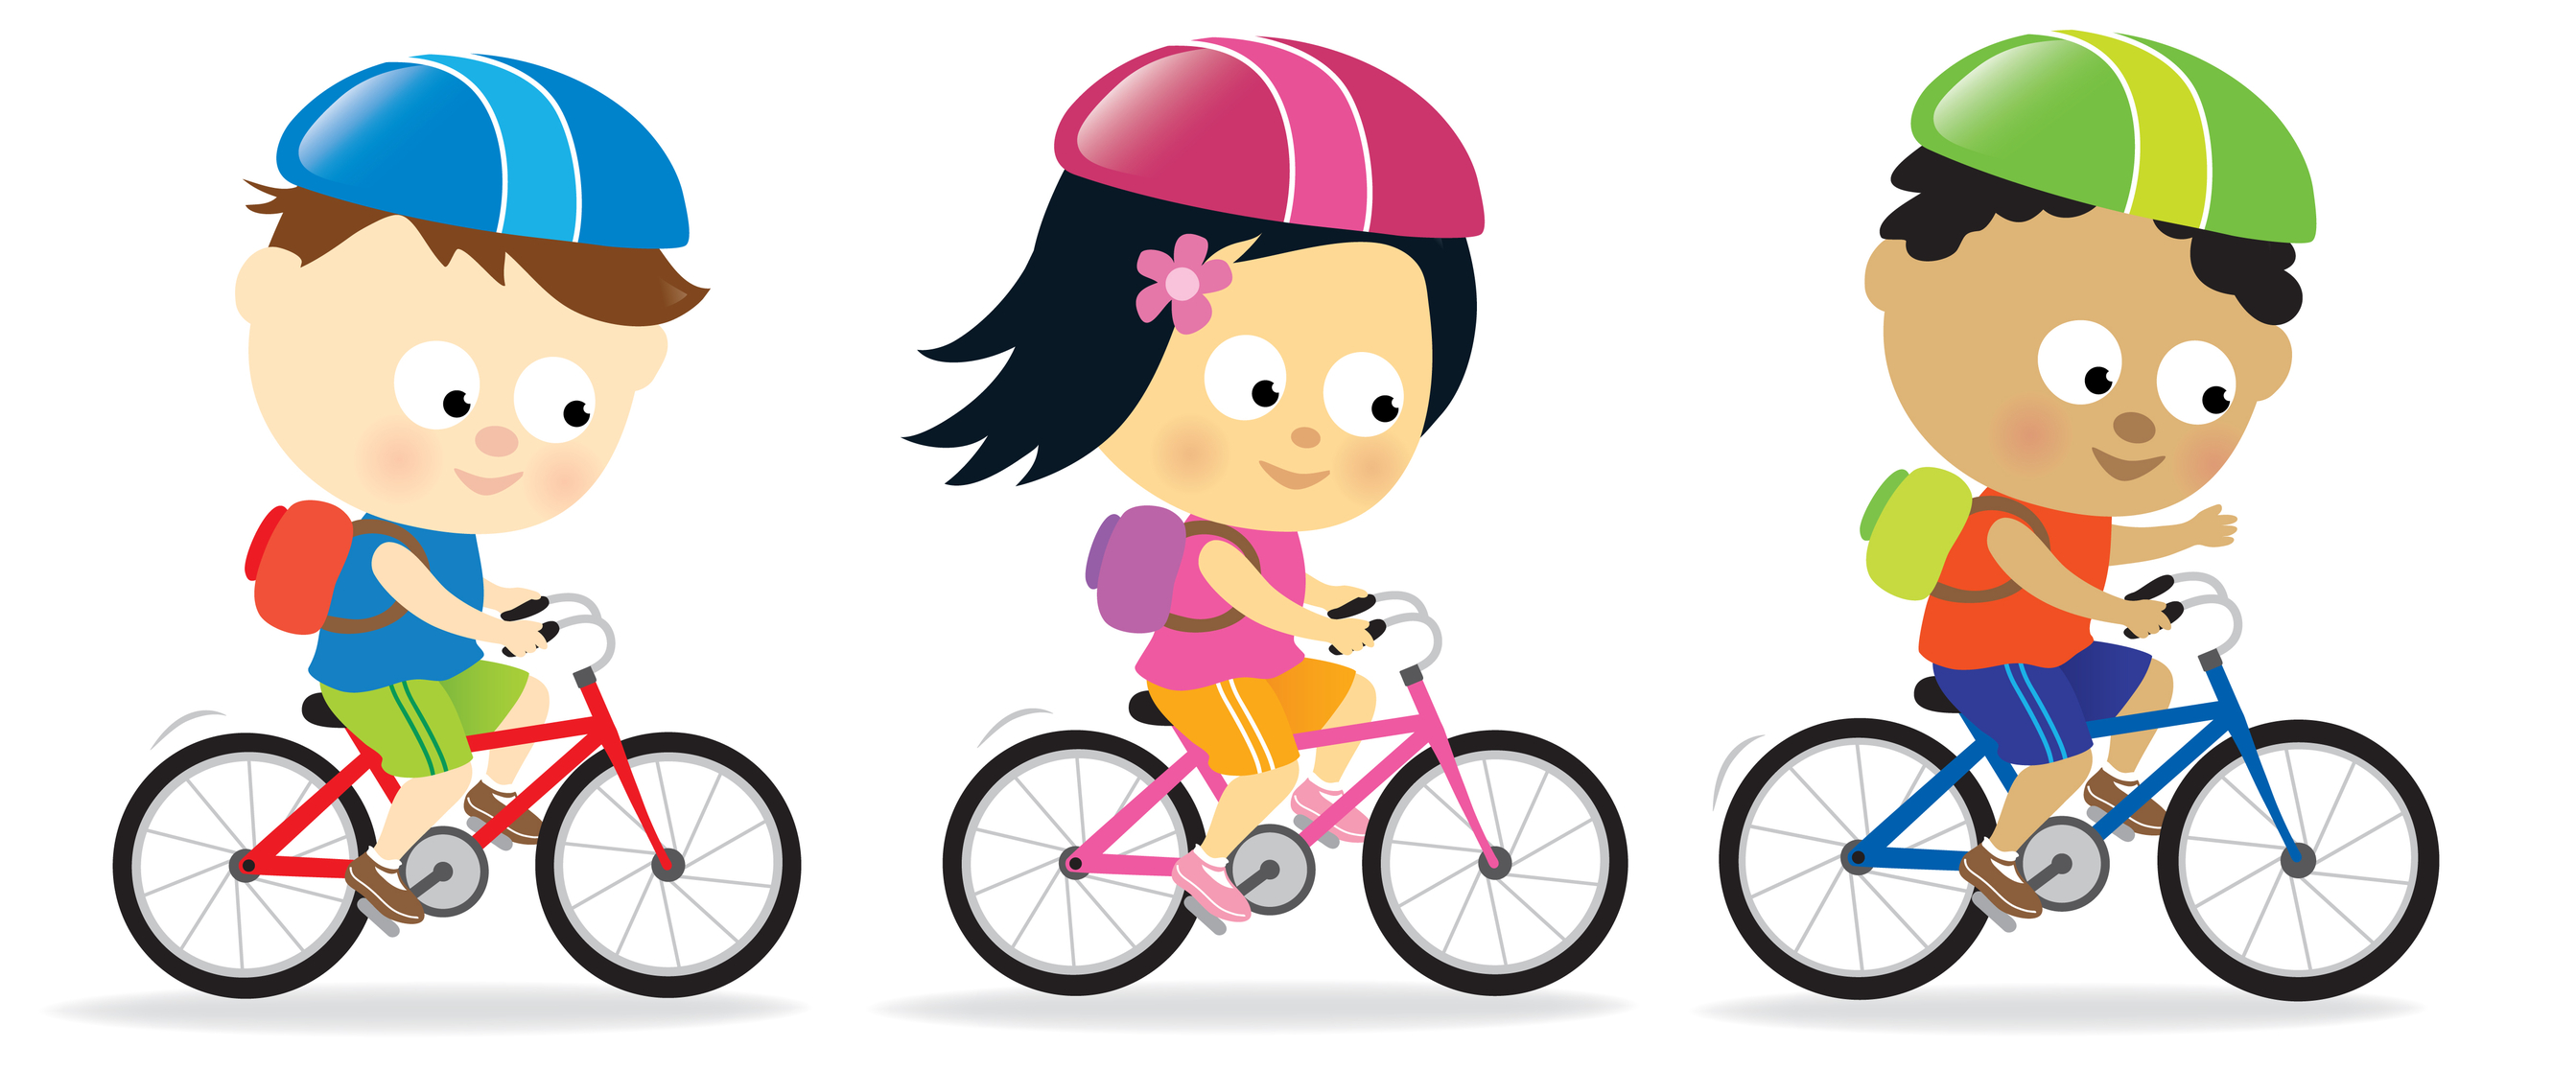 Bicycle safety clipart